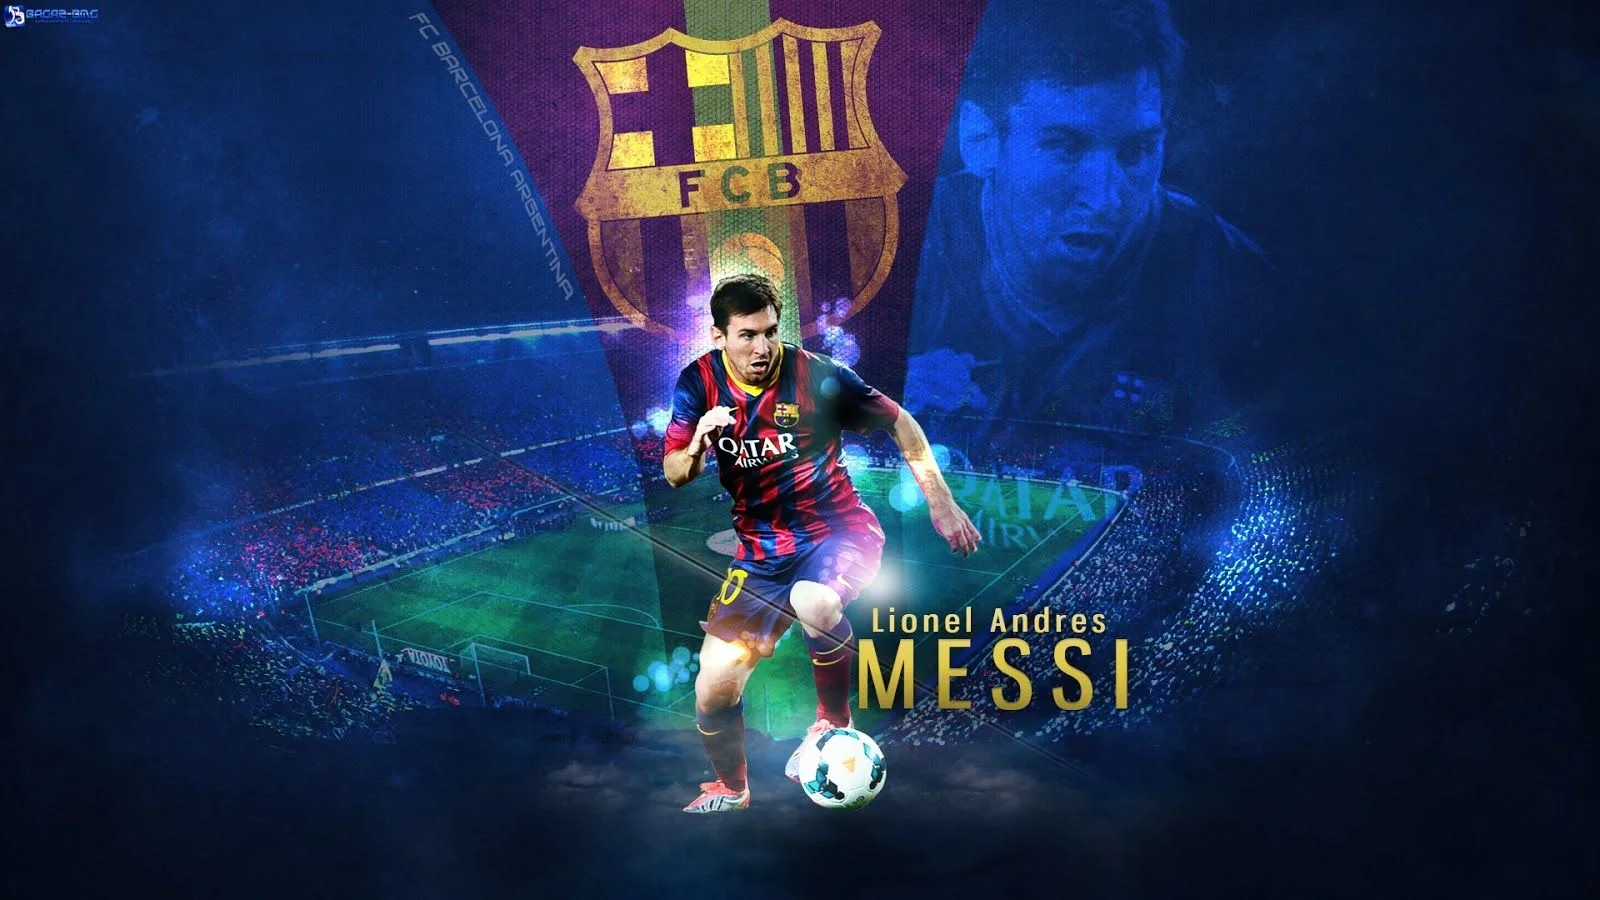 Eye Catching Lionel Messi Wallpaper with barcelona flag